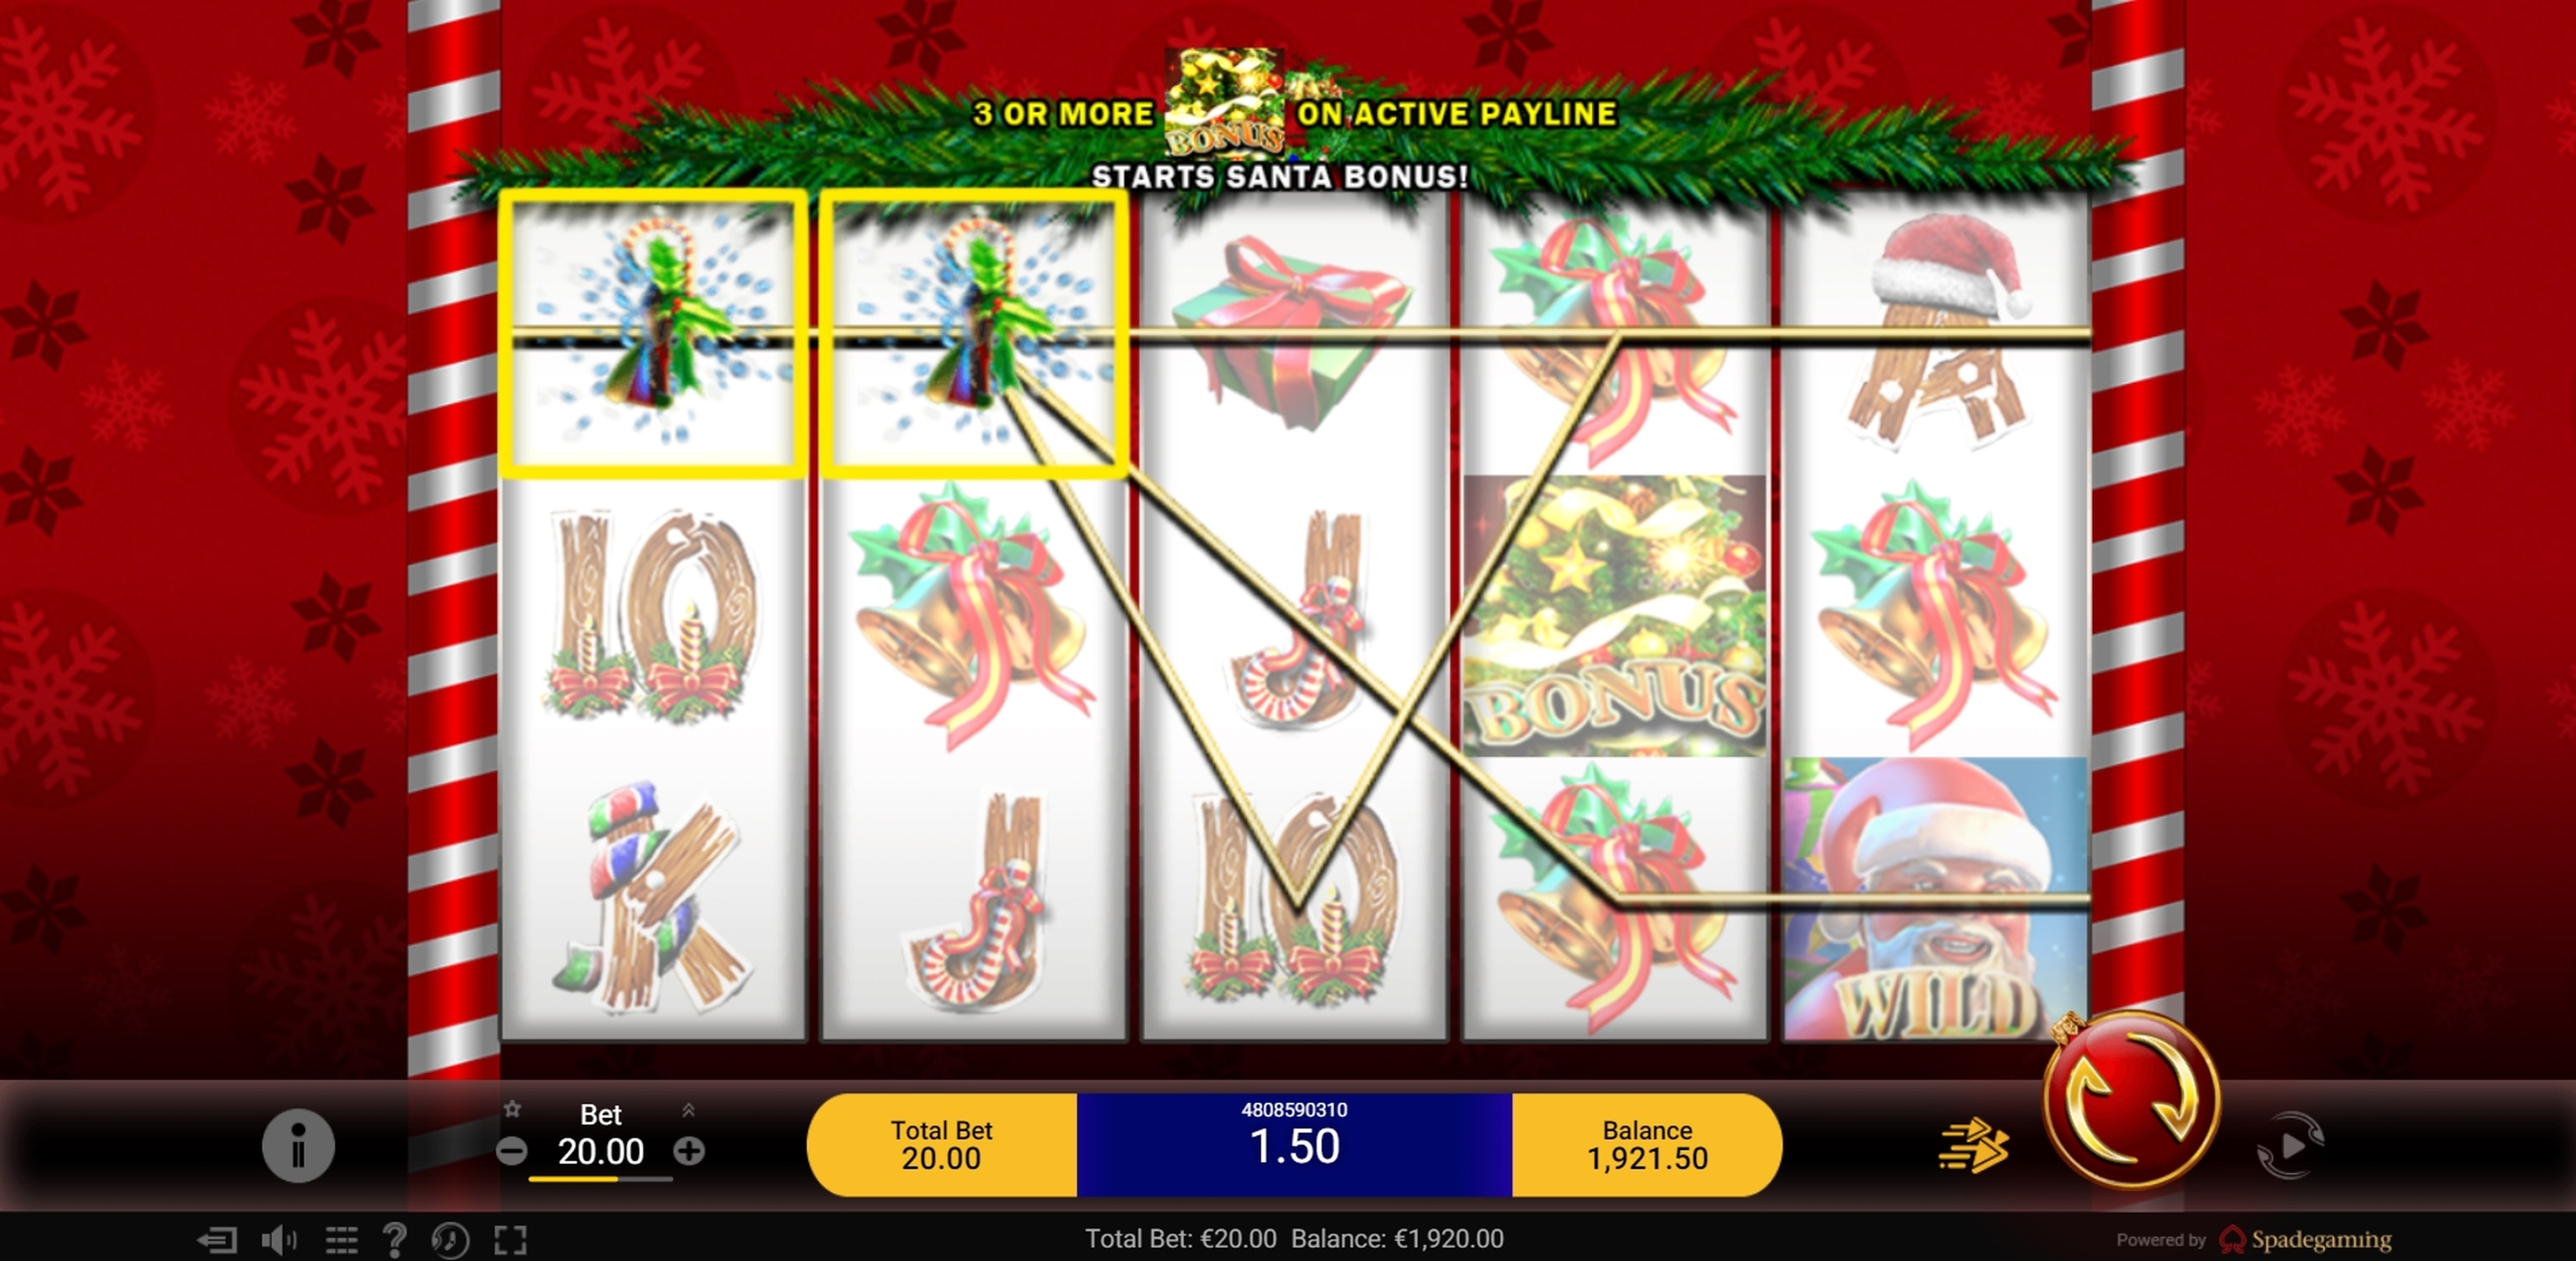 Win Money in Santa Gifts Free Slot Game by Spade Gaming